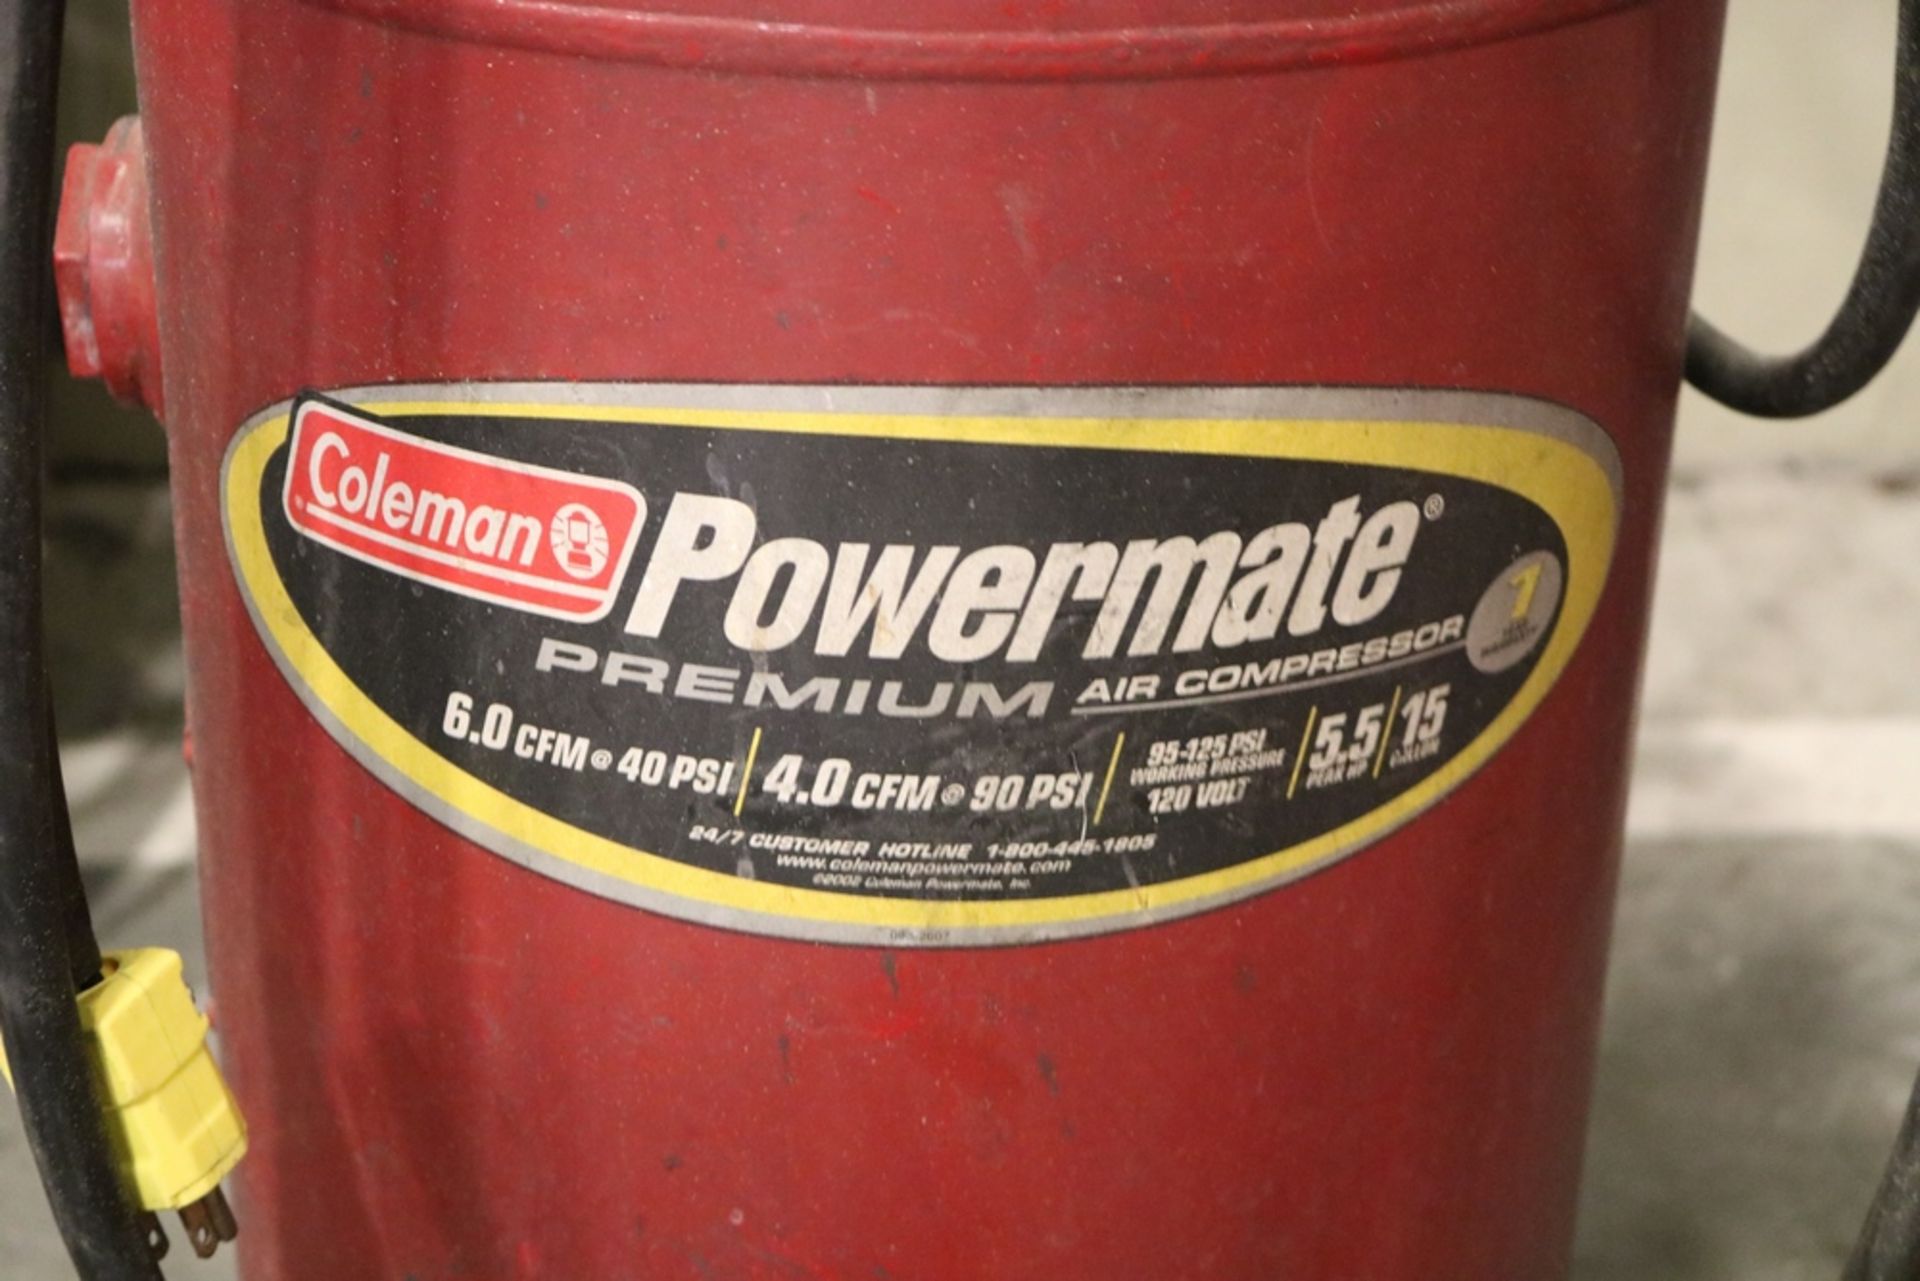 Like New Craftsman 6 Gallon Air Compressor and Coleman Powermate 15 Gallon Portable Air Compressor - Image 5 of 5